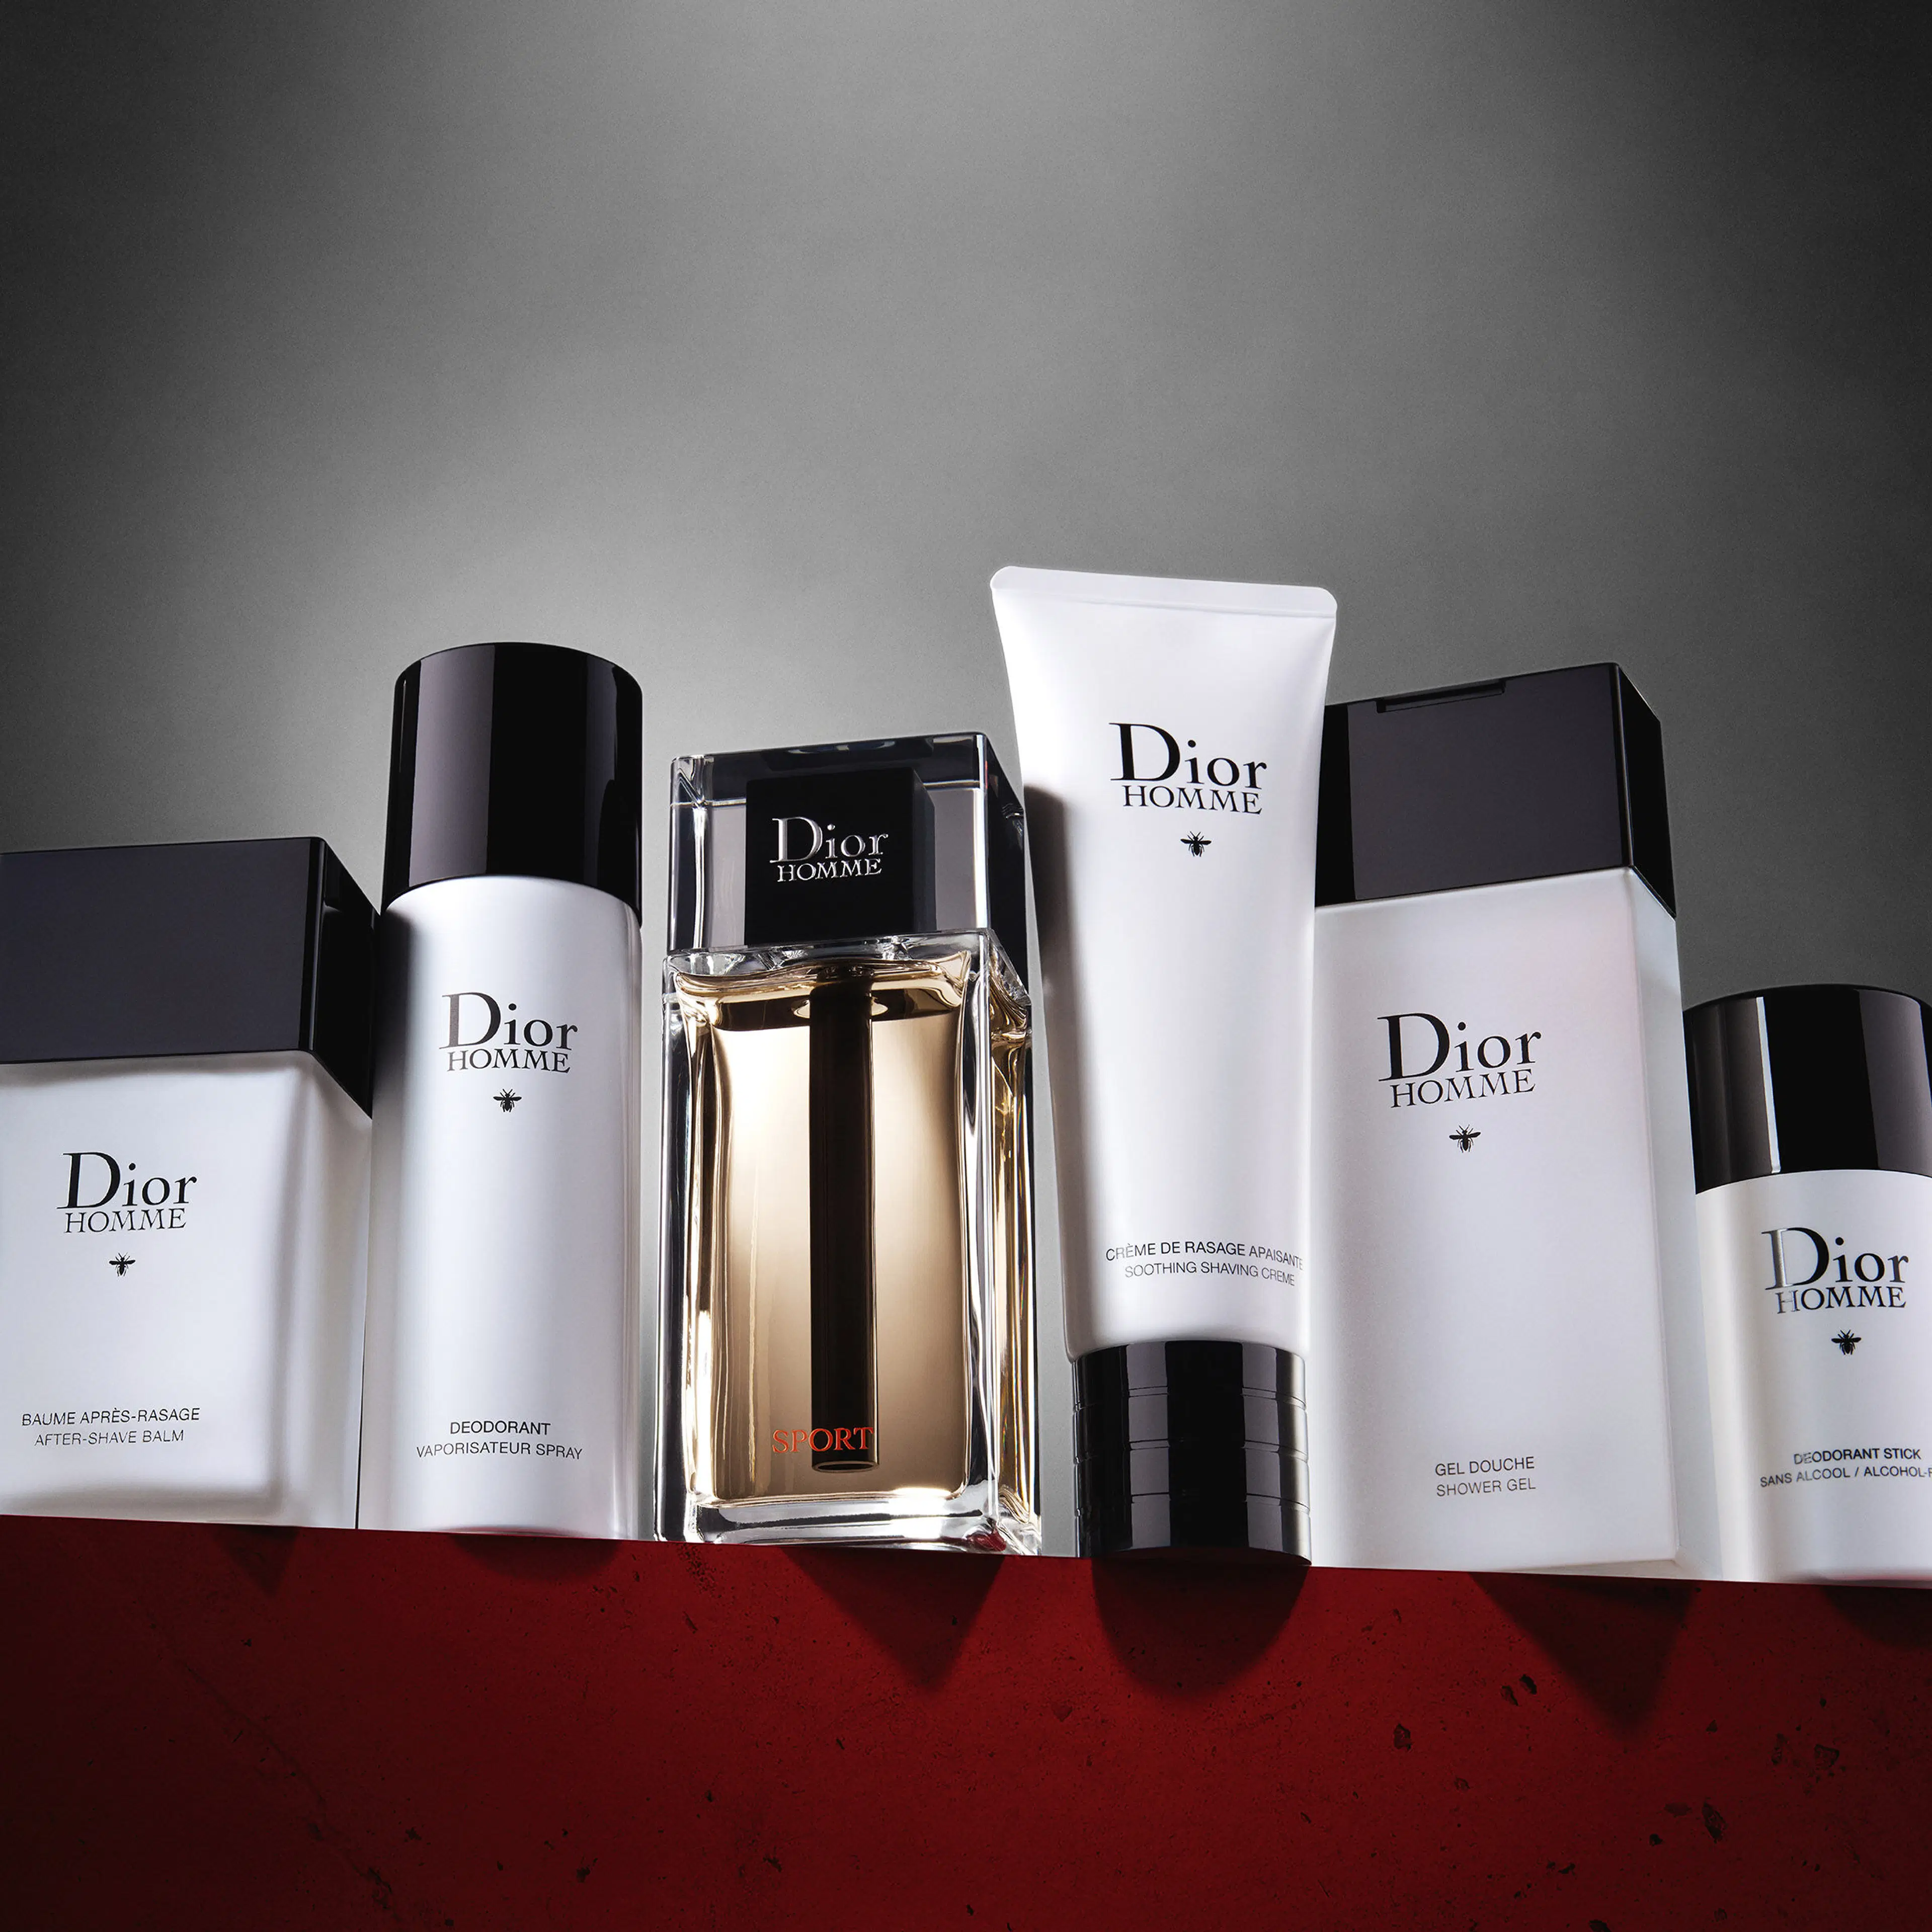 DIOR Homme Soothing Shaving Creme parranajovoide 125 ml